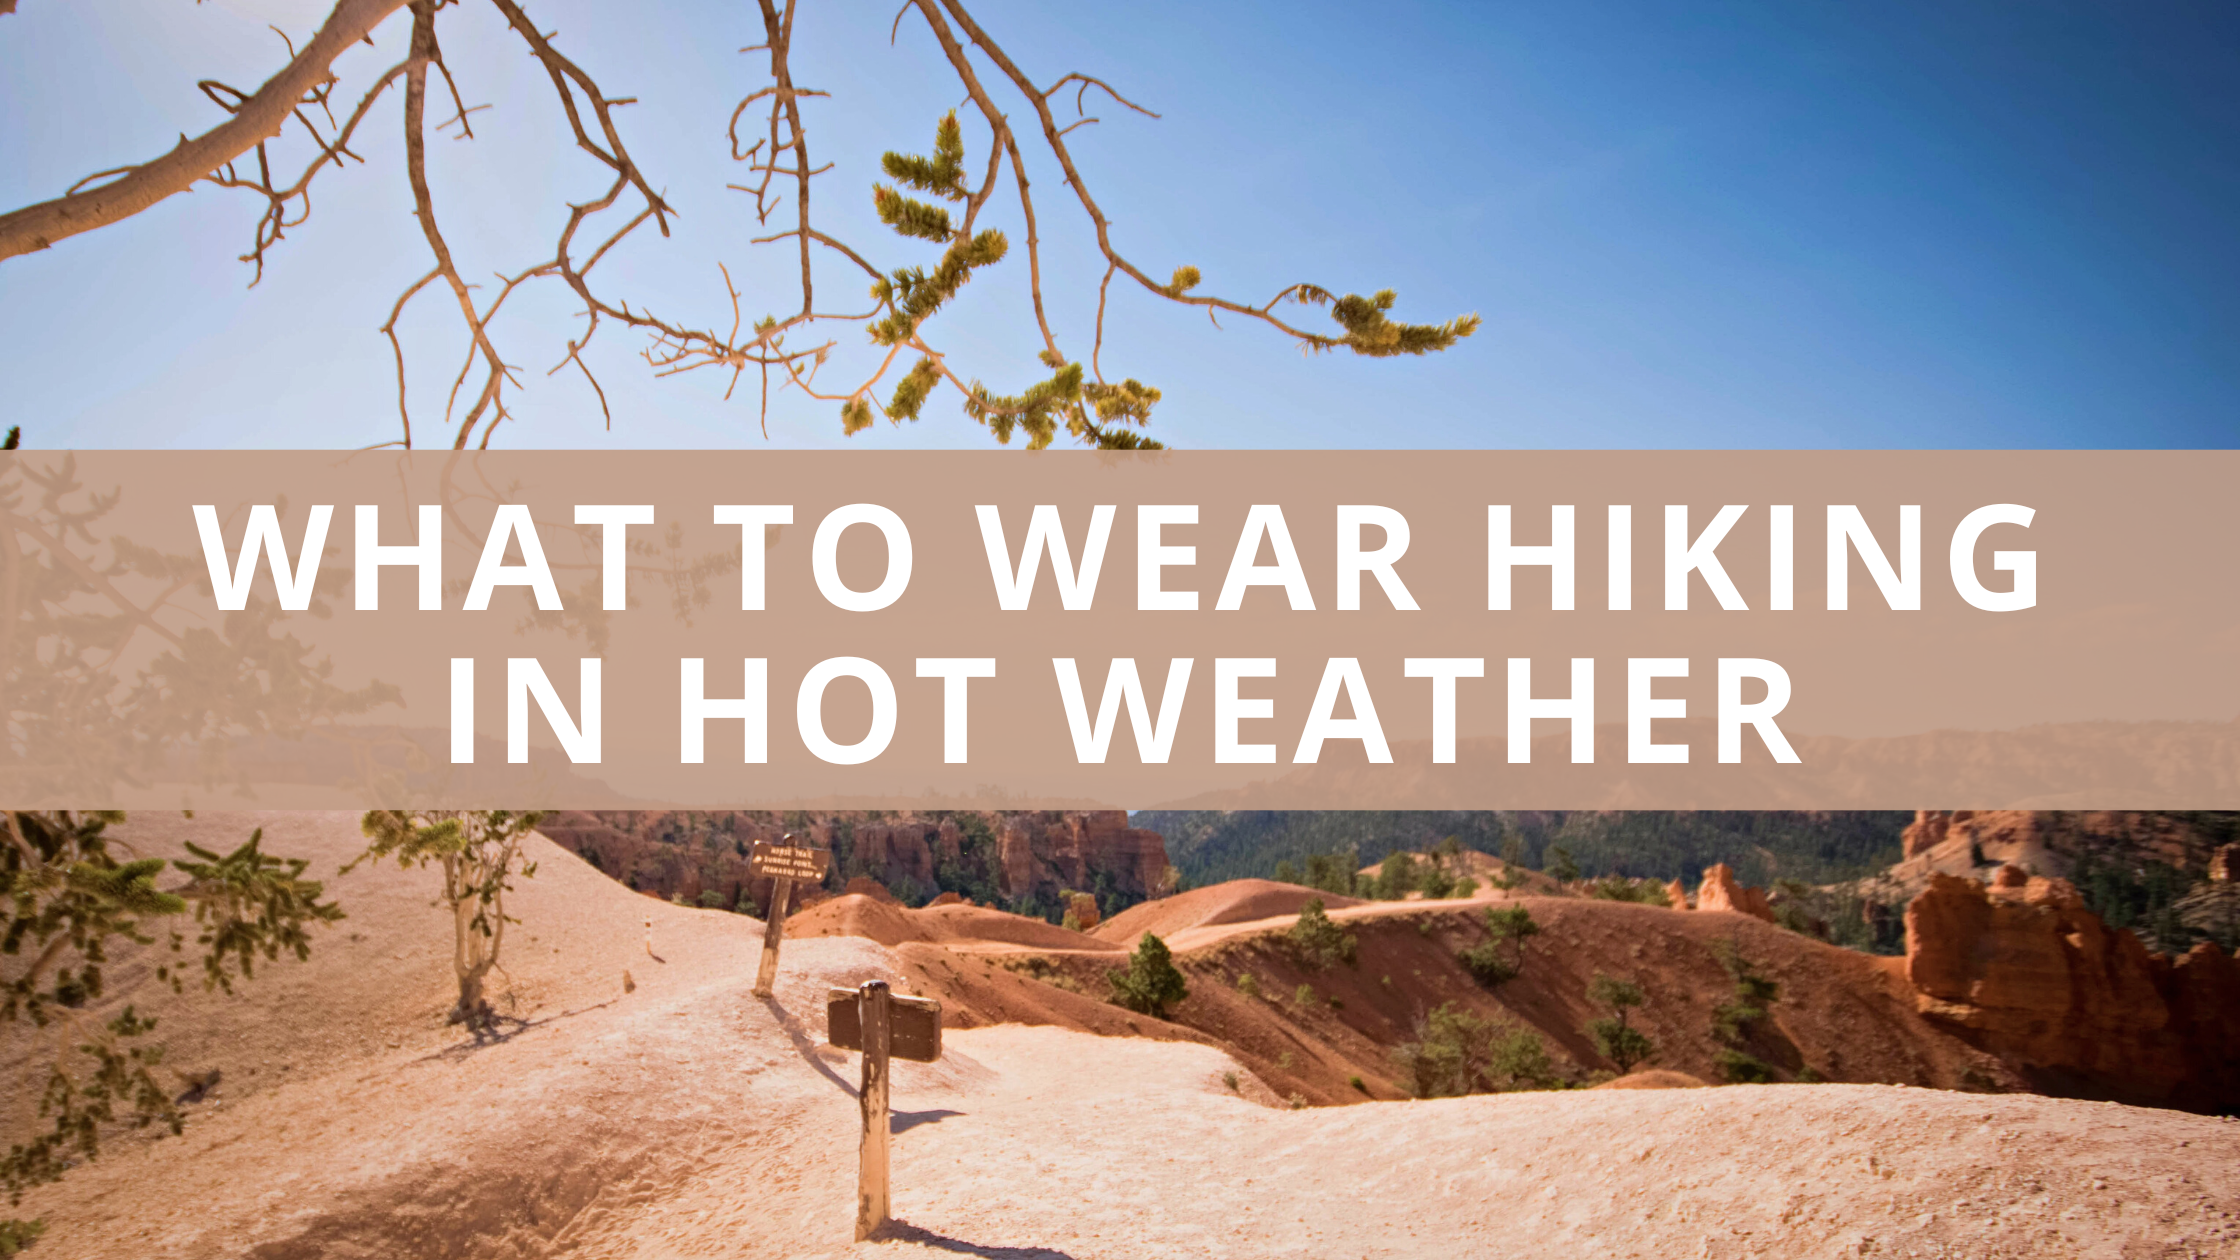 What to Wear Hiking in Hot Weather – 5 Best Tips